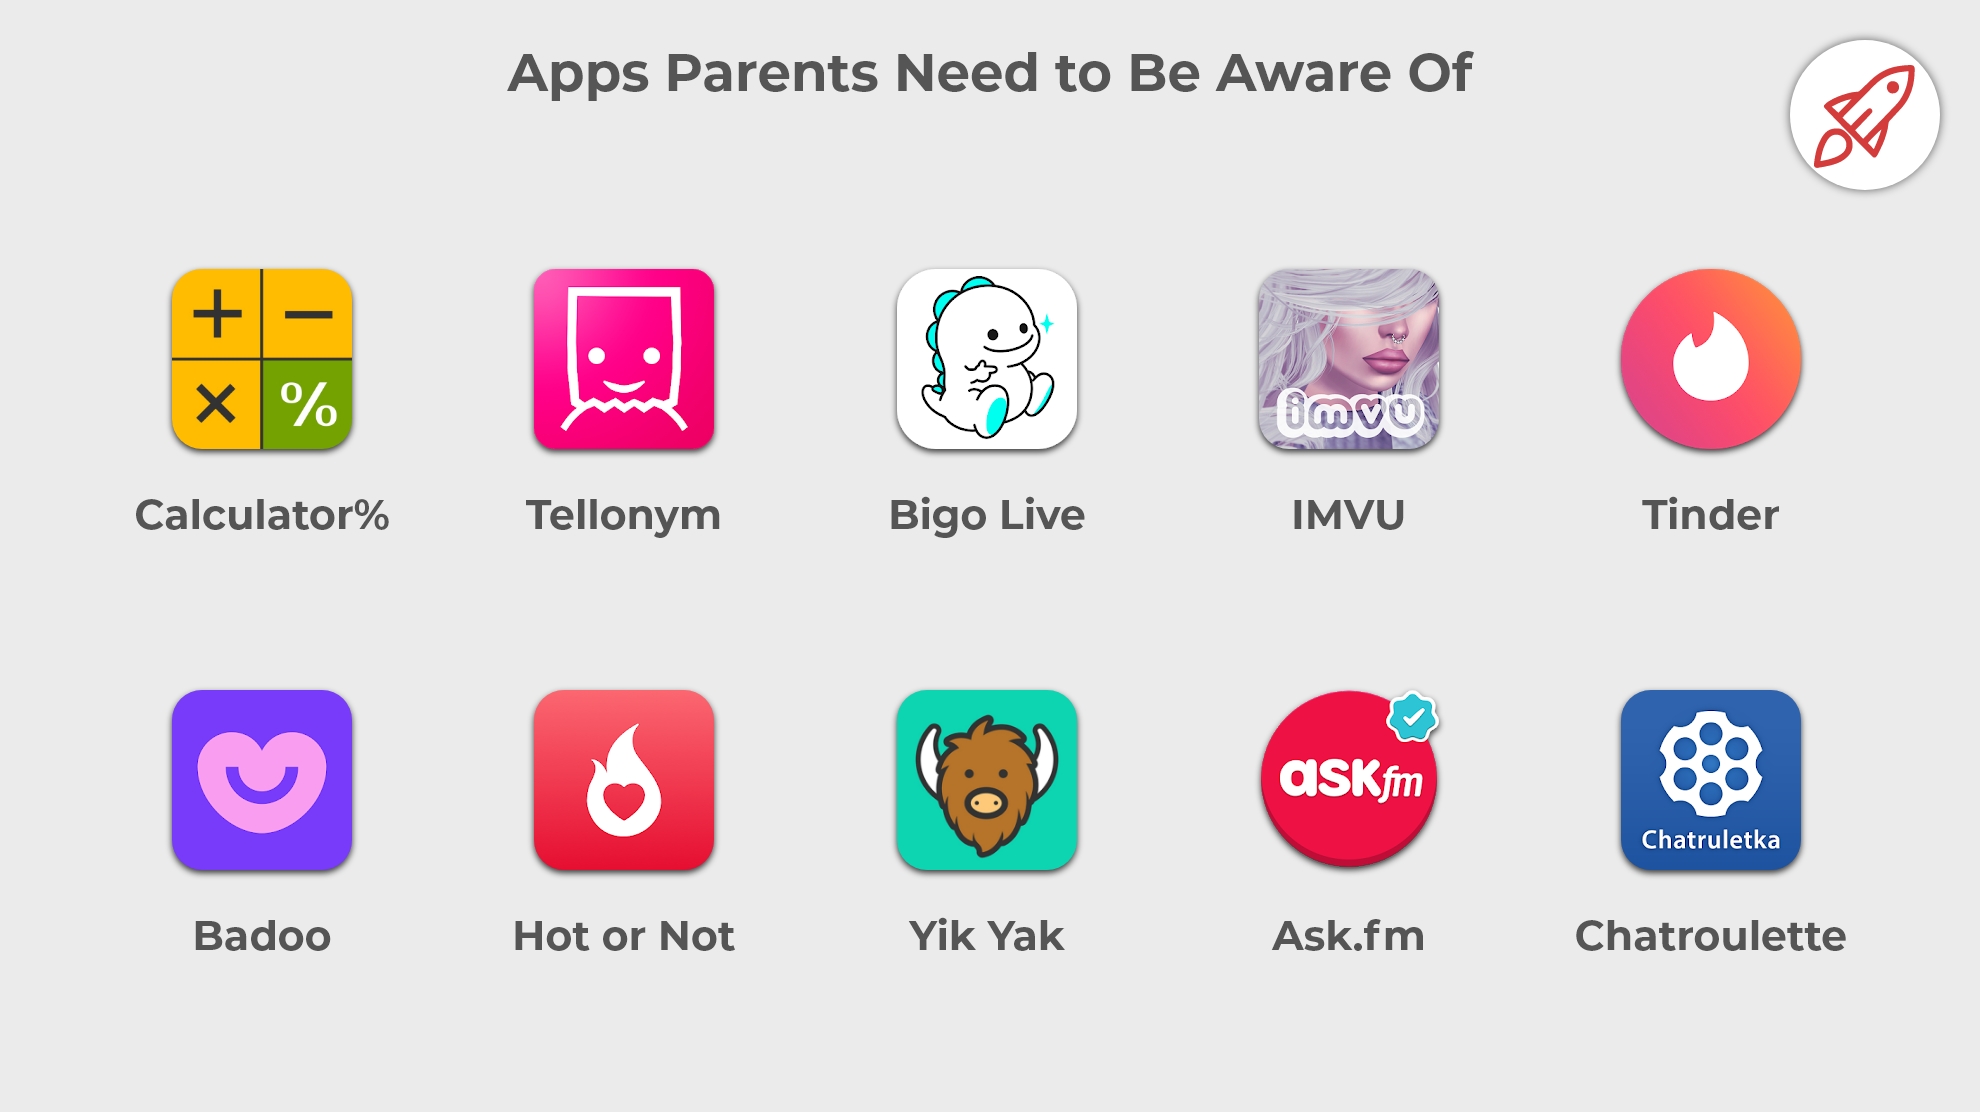 The 14 Apps and Social Media Sites Parents Need to be Aware Of